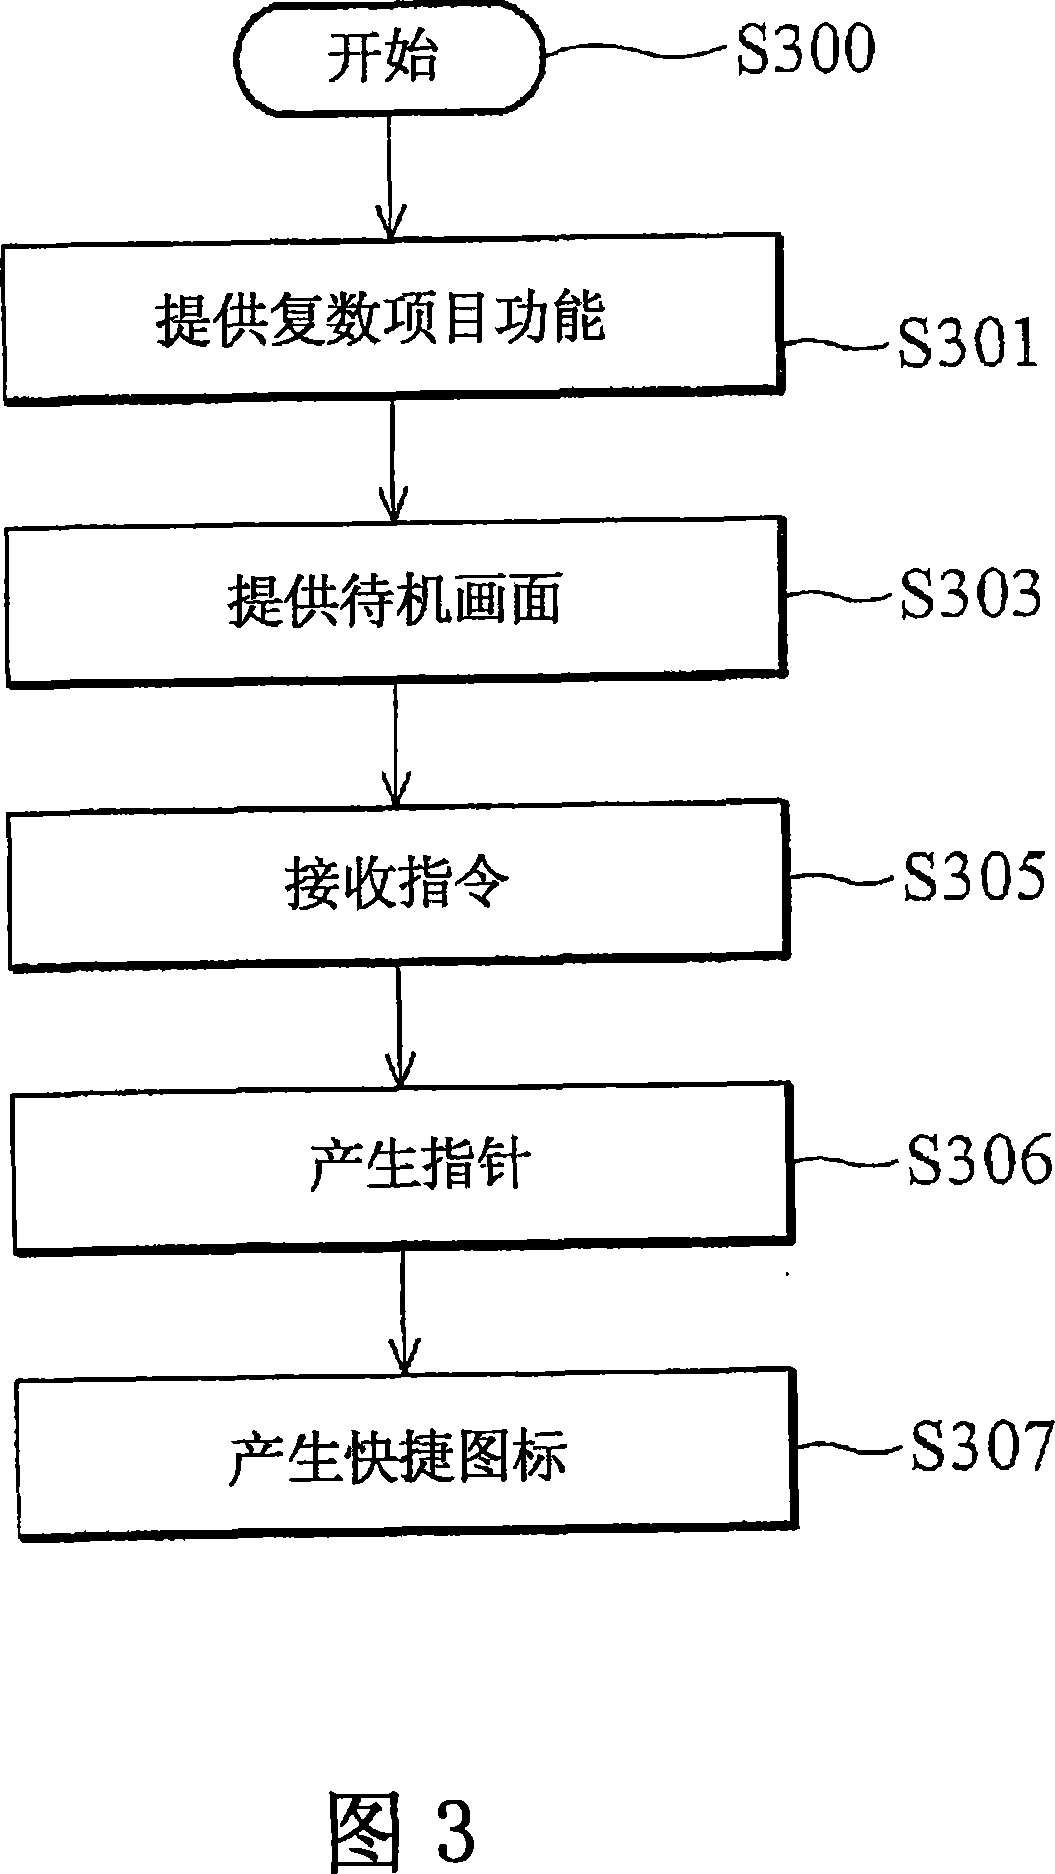 System and method for controlling a portable electronic device